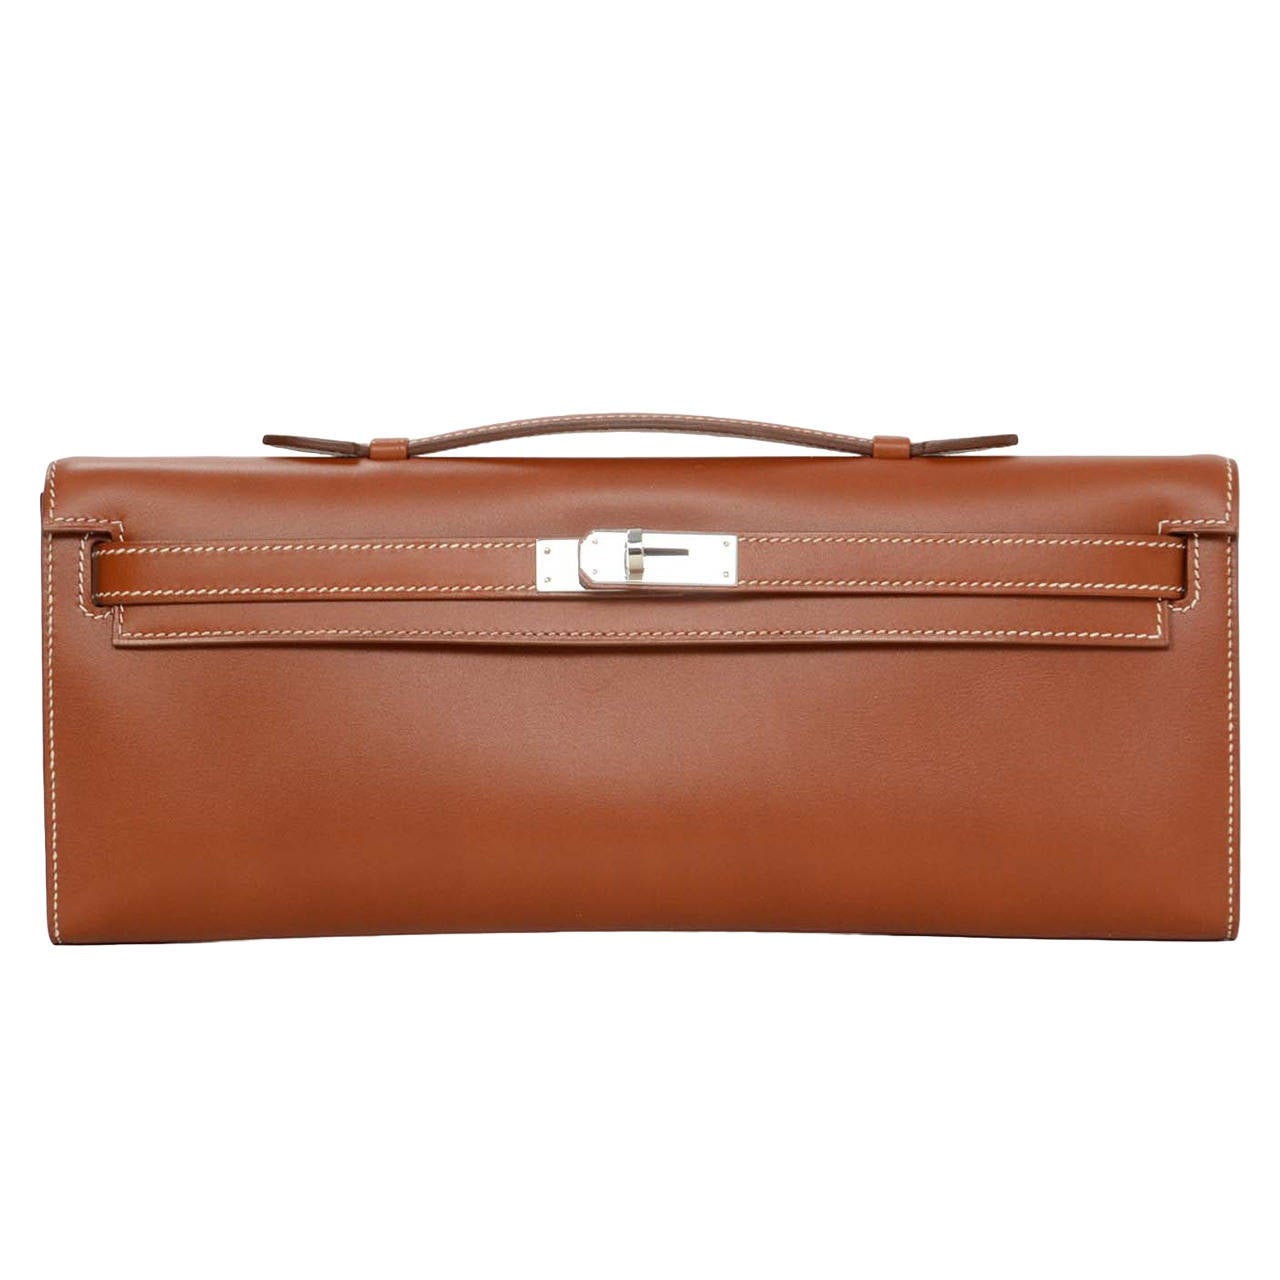 HERMES 2010 Tan Swift Leather Kelly Cut Clutch Bag w/ White Contrast Stitching